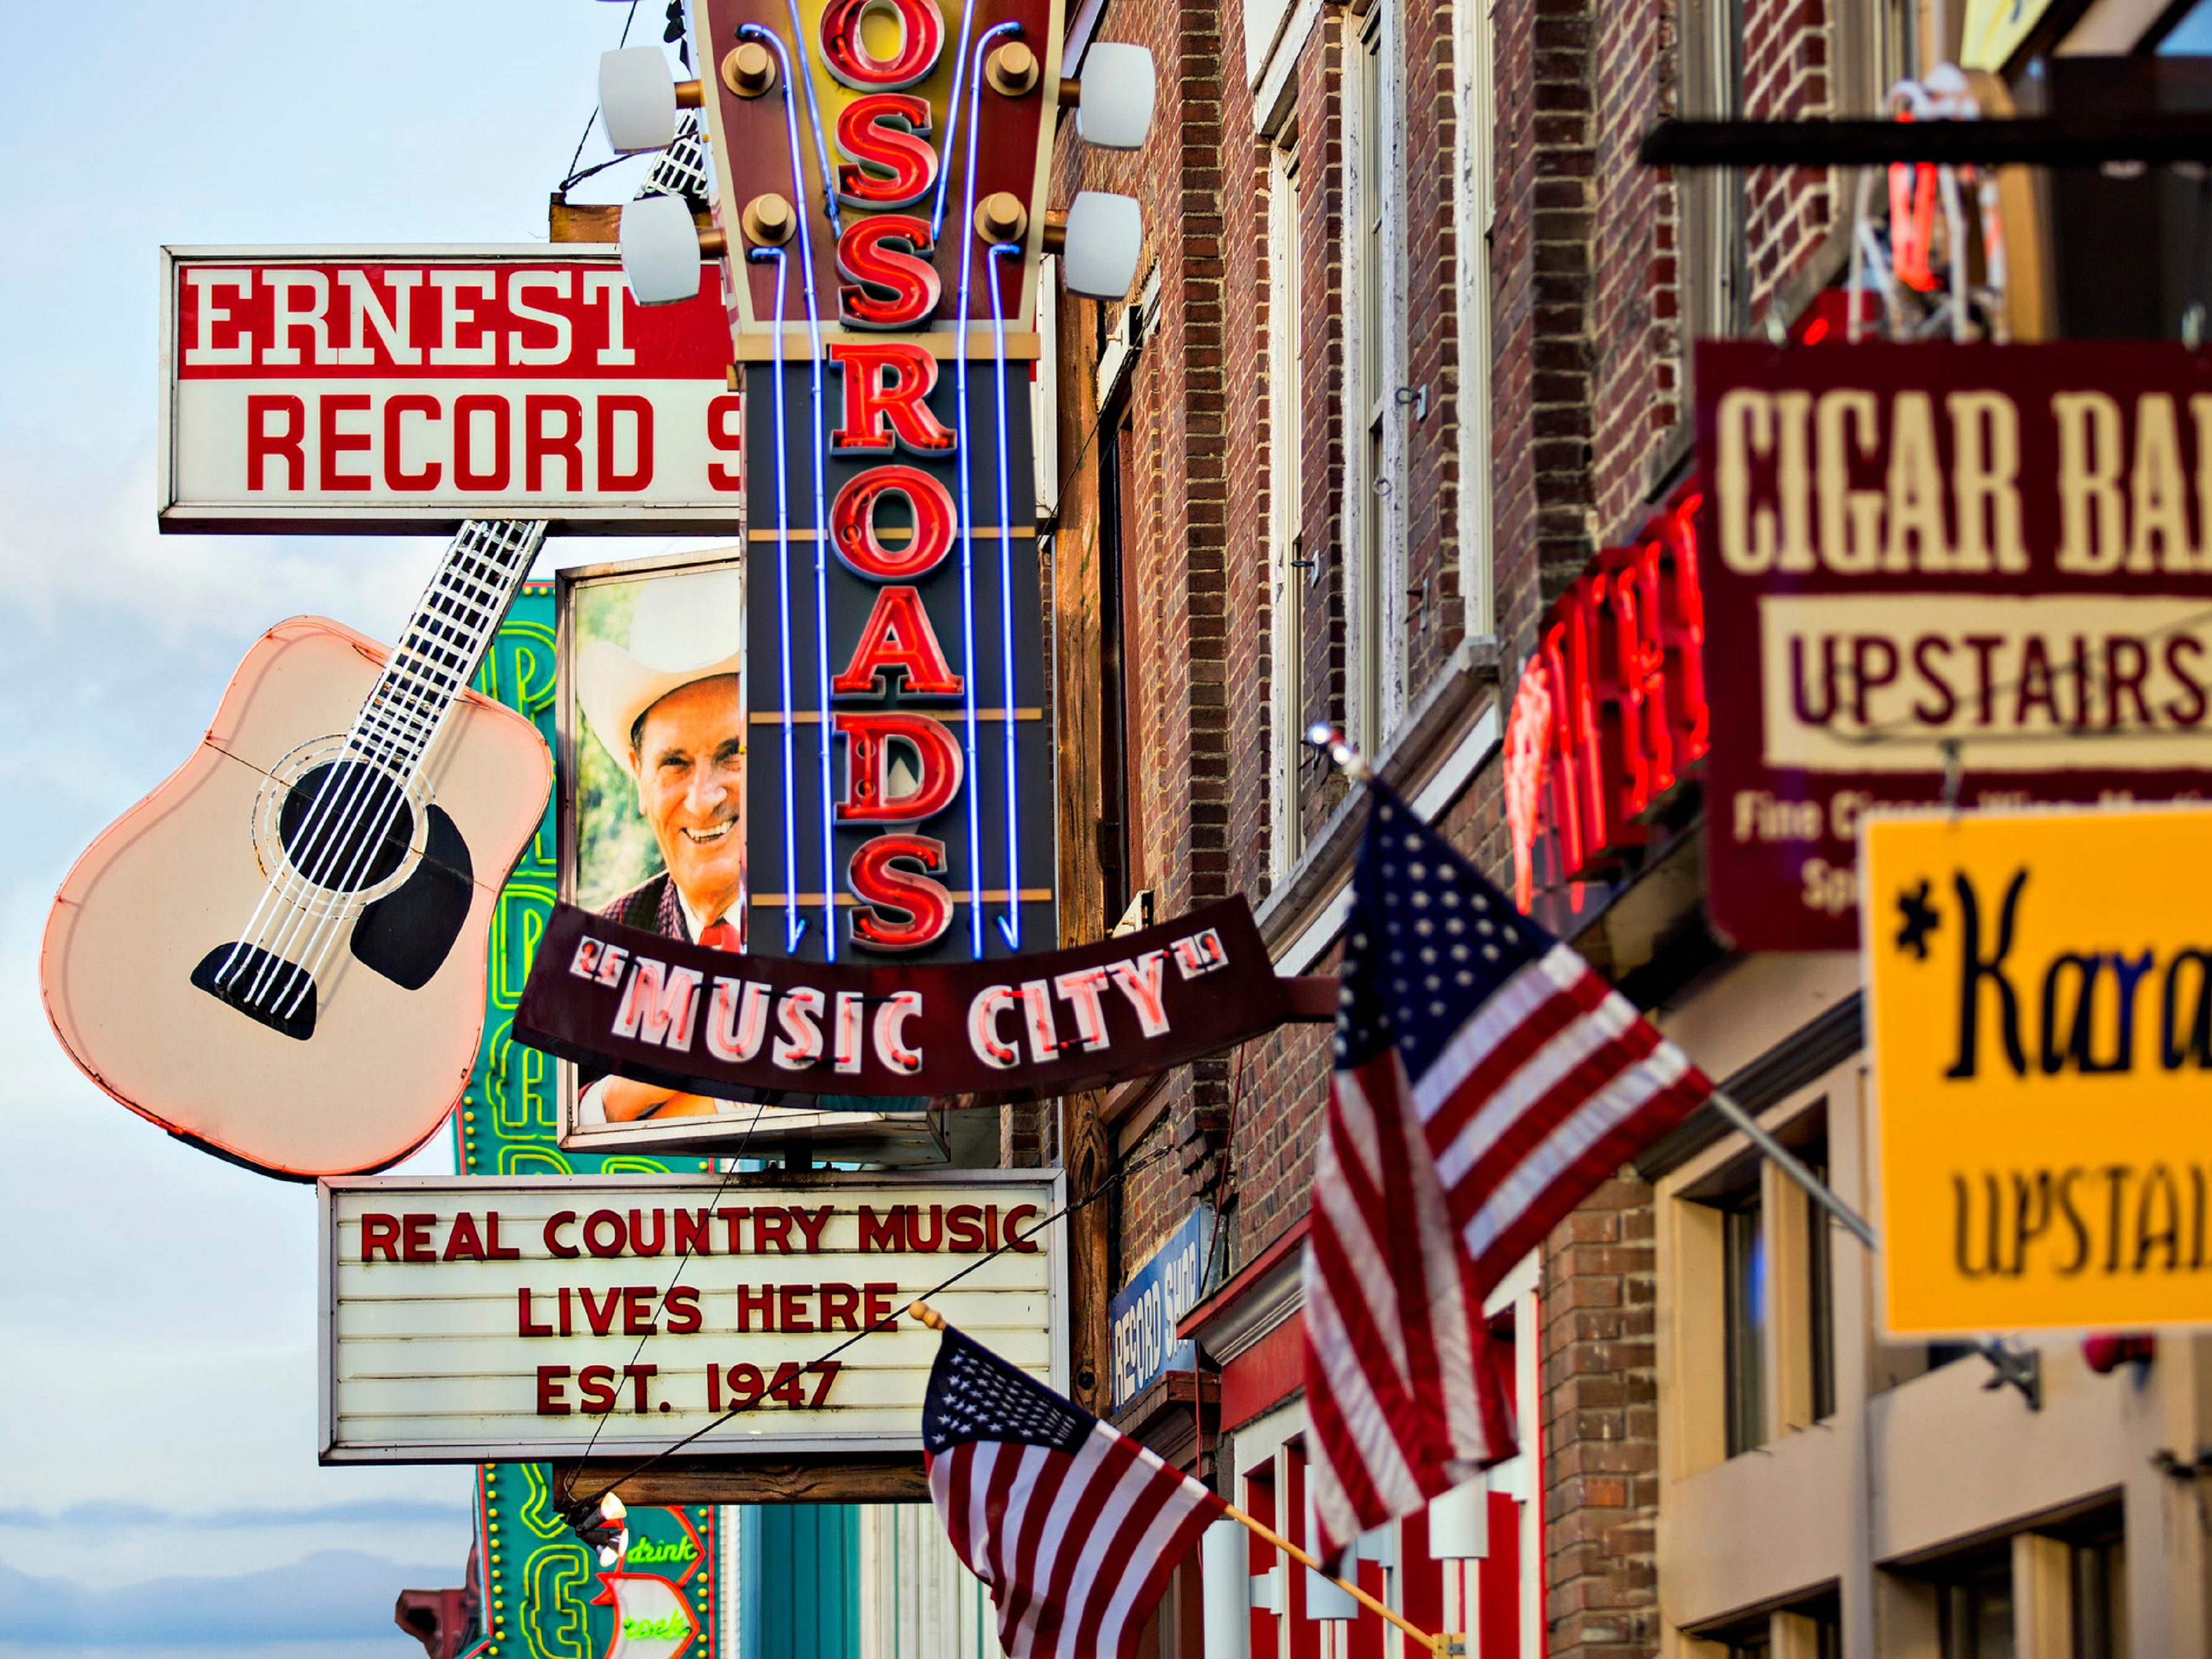 Steps away from the best live music and Honky Tonk's in Nashville.